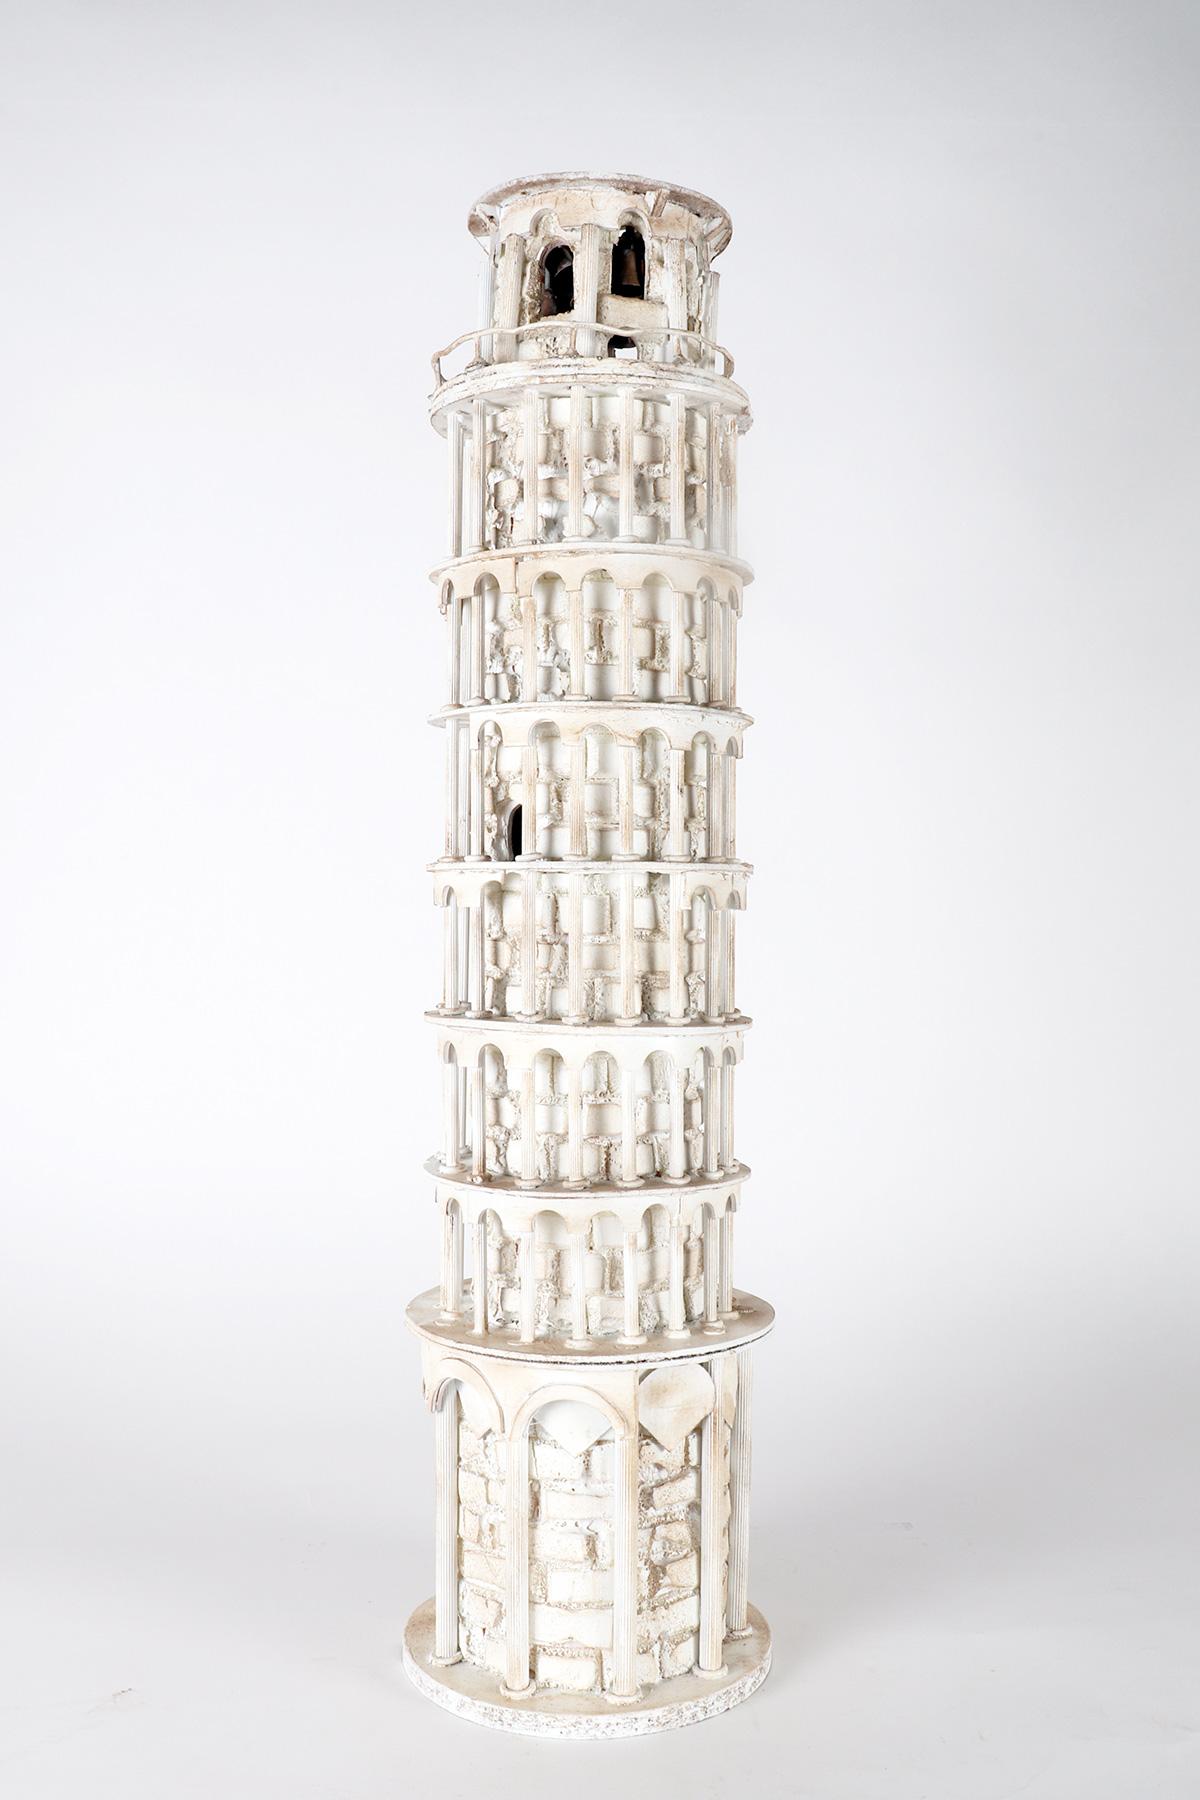 Italian A Grand Tour wooden maquette, depicting the Tower of Pisa, Italy 1950. For Sale